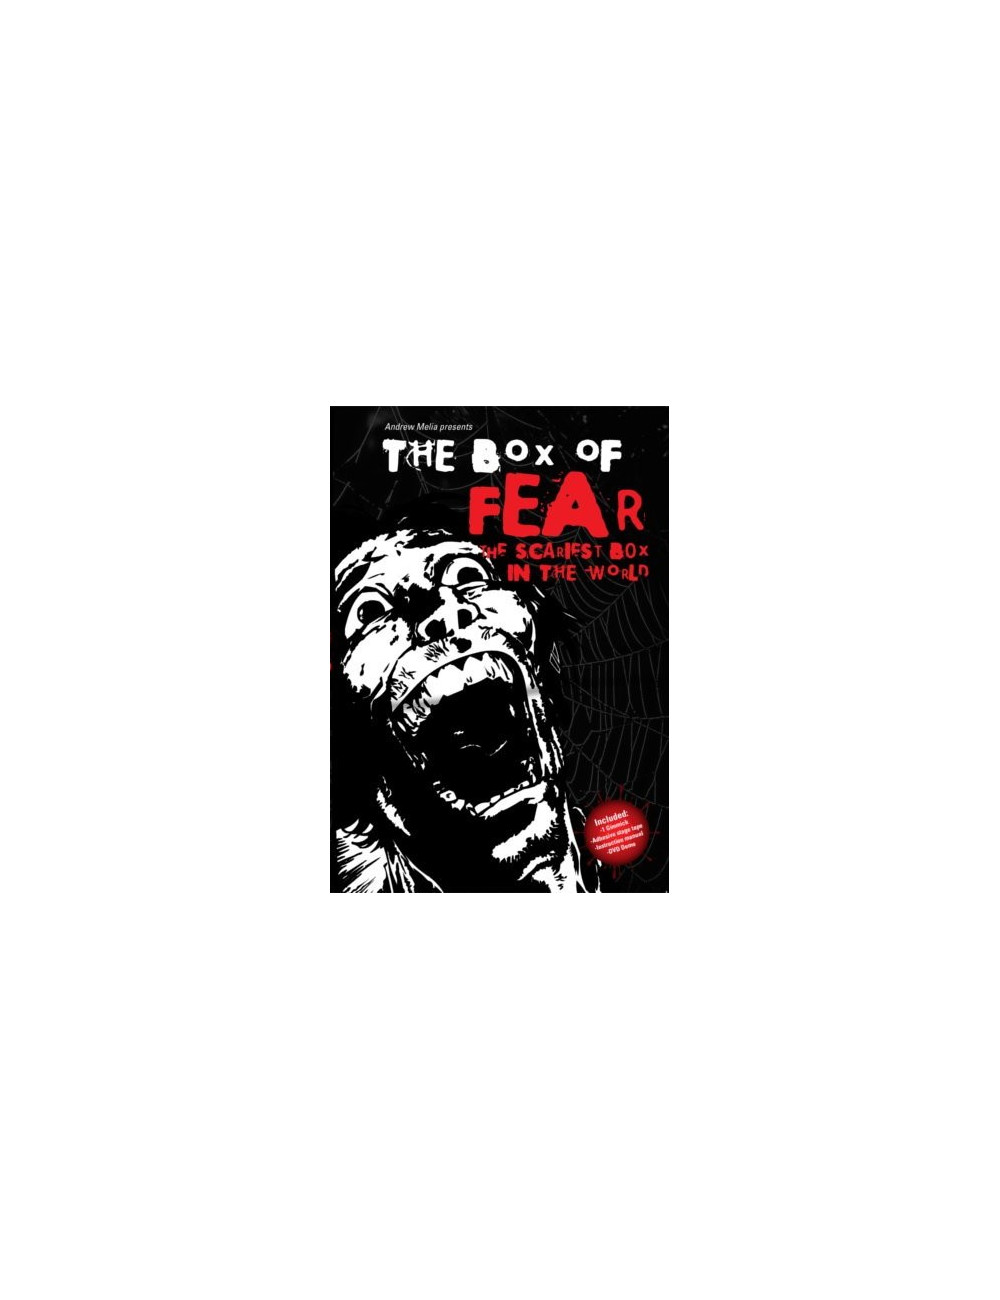 THE BOX OF FEAR THE SCARIEST BOX IN THE WORLD (Andrew Melia)